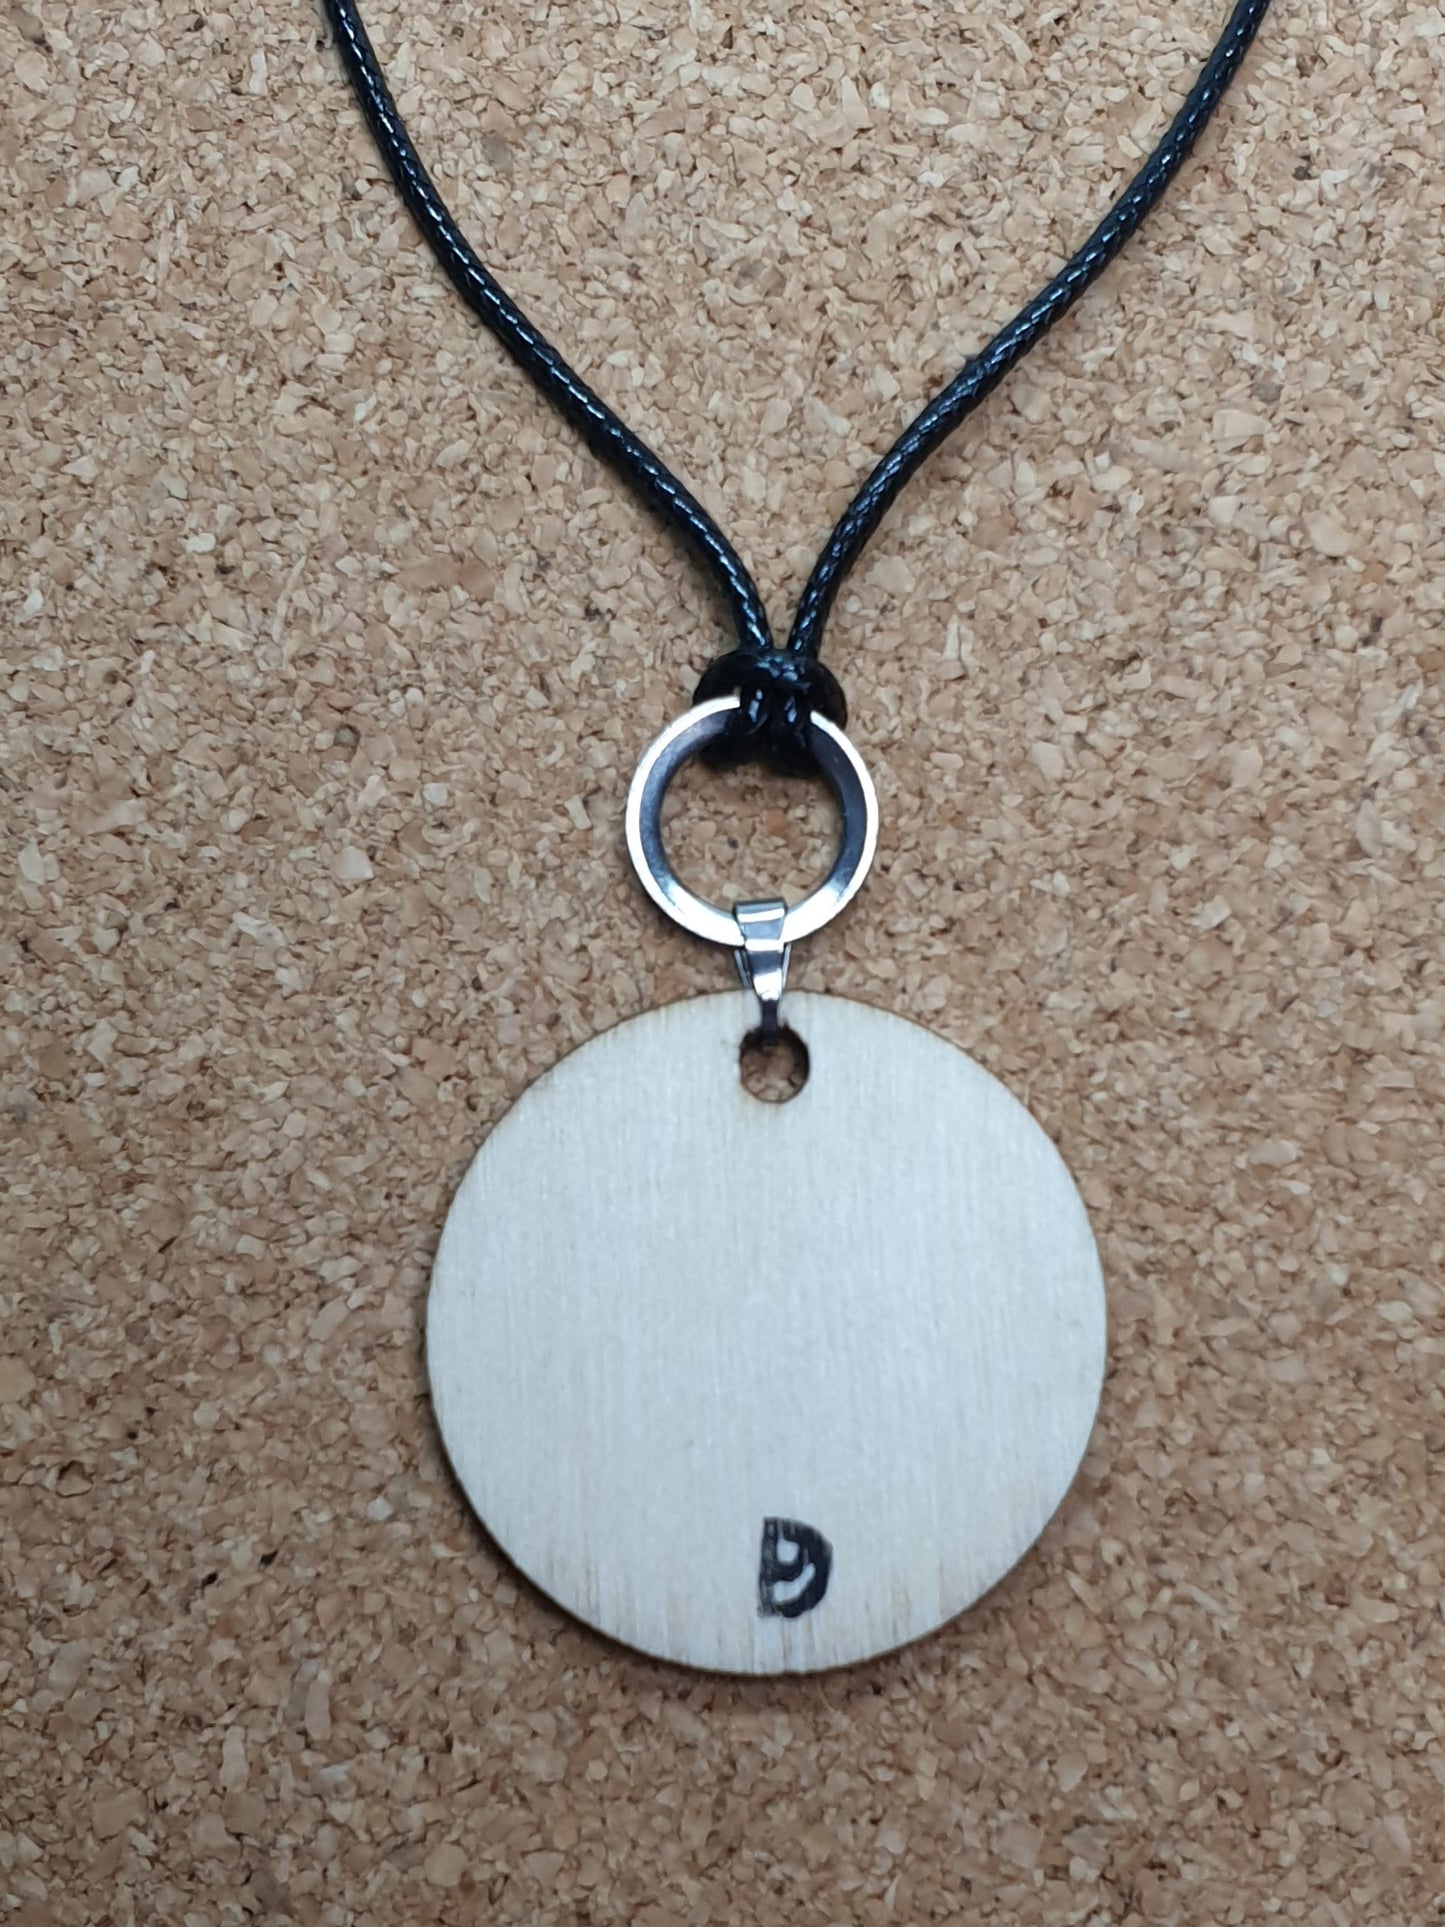 Sawtooth beetle hand printed wooden pendant